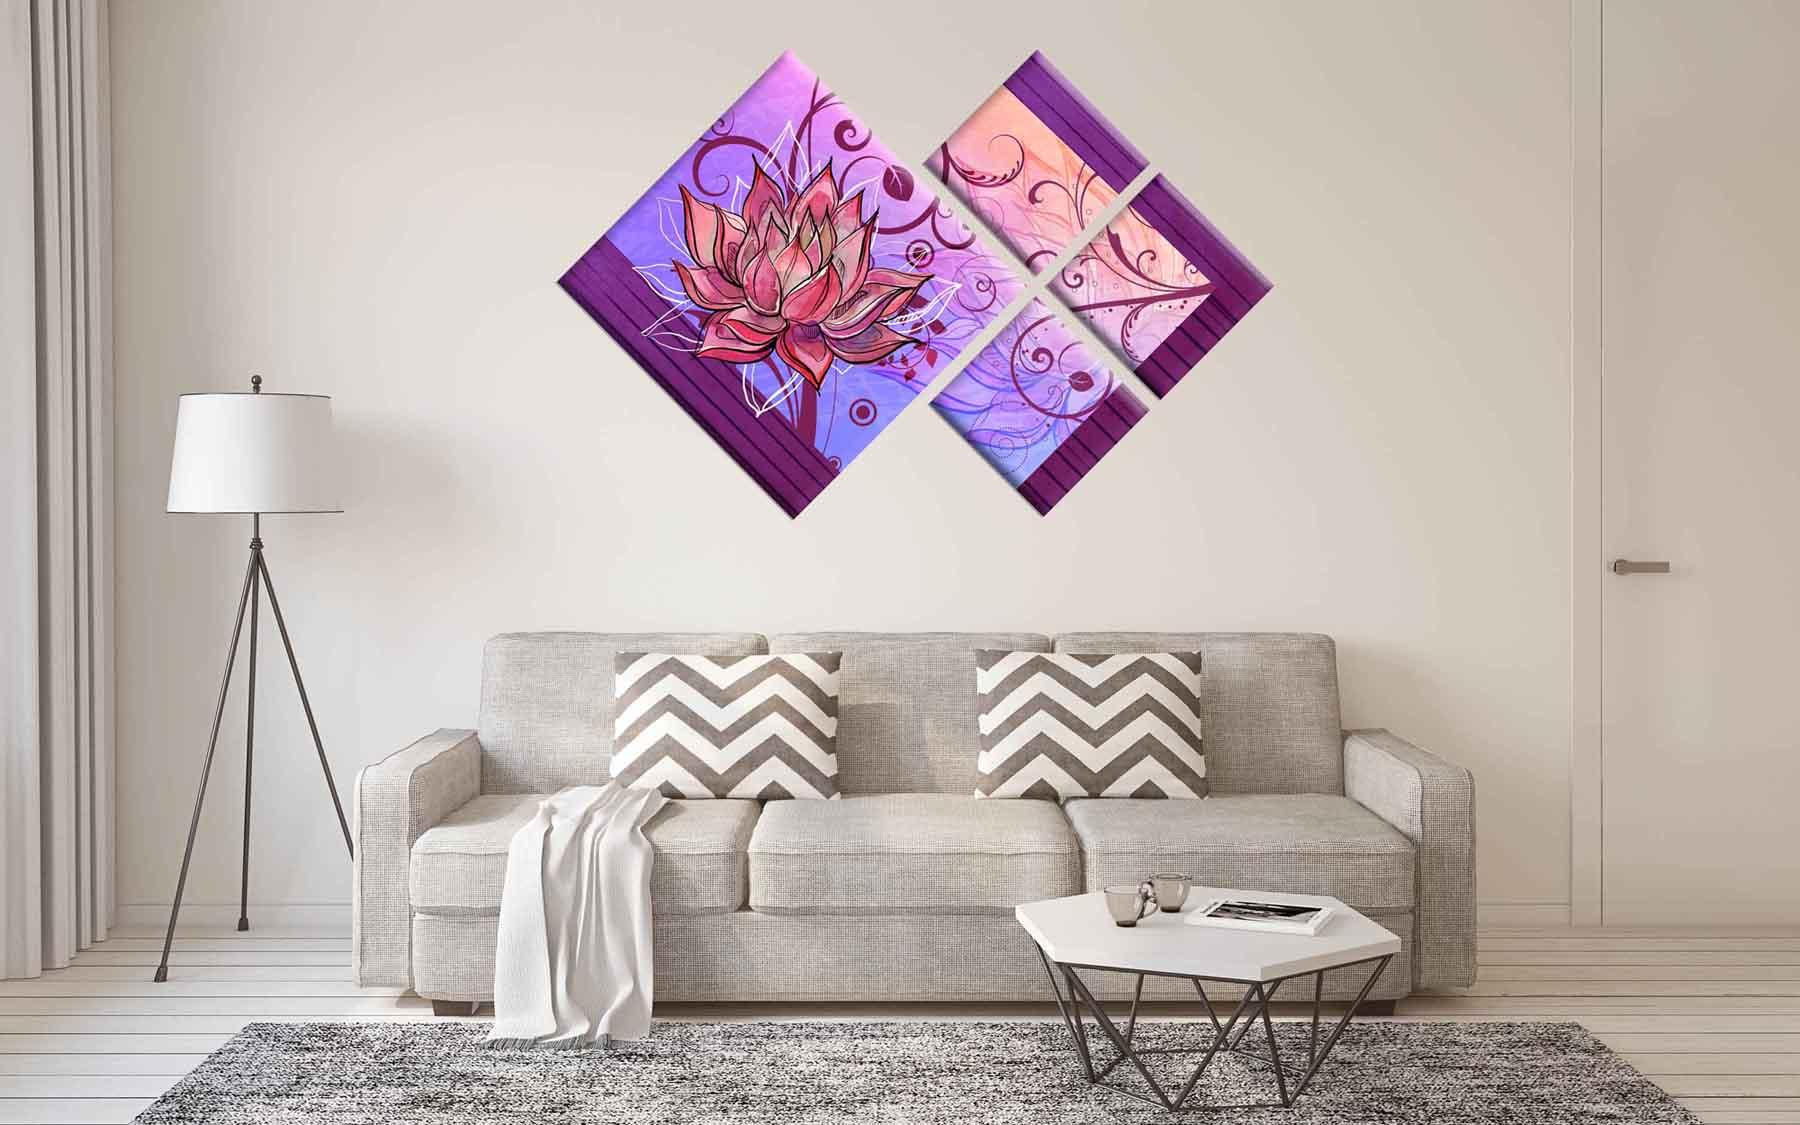 Modular picture - a delicate flower on a purple background